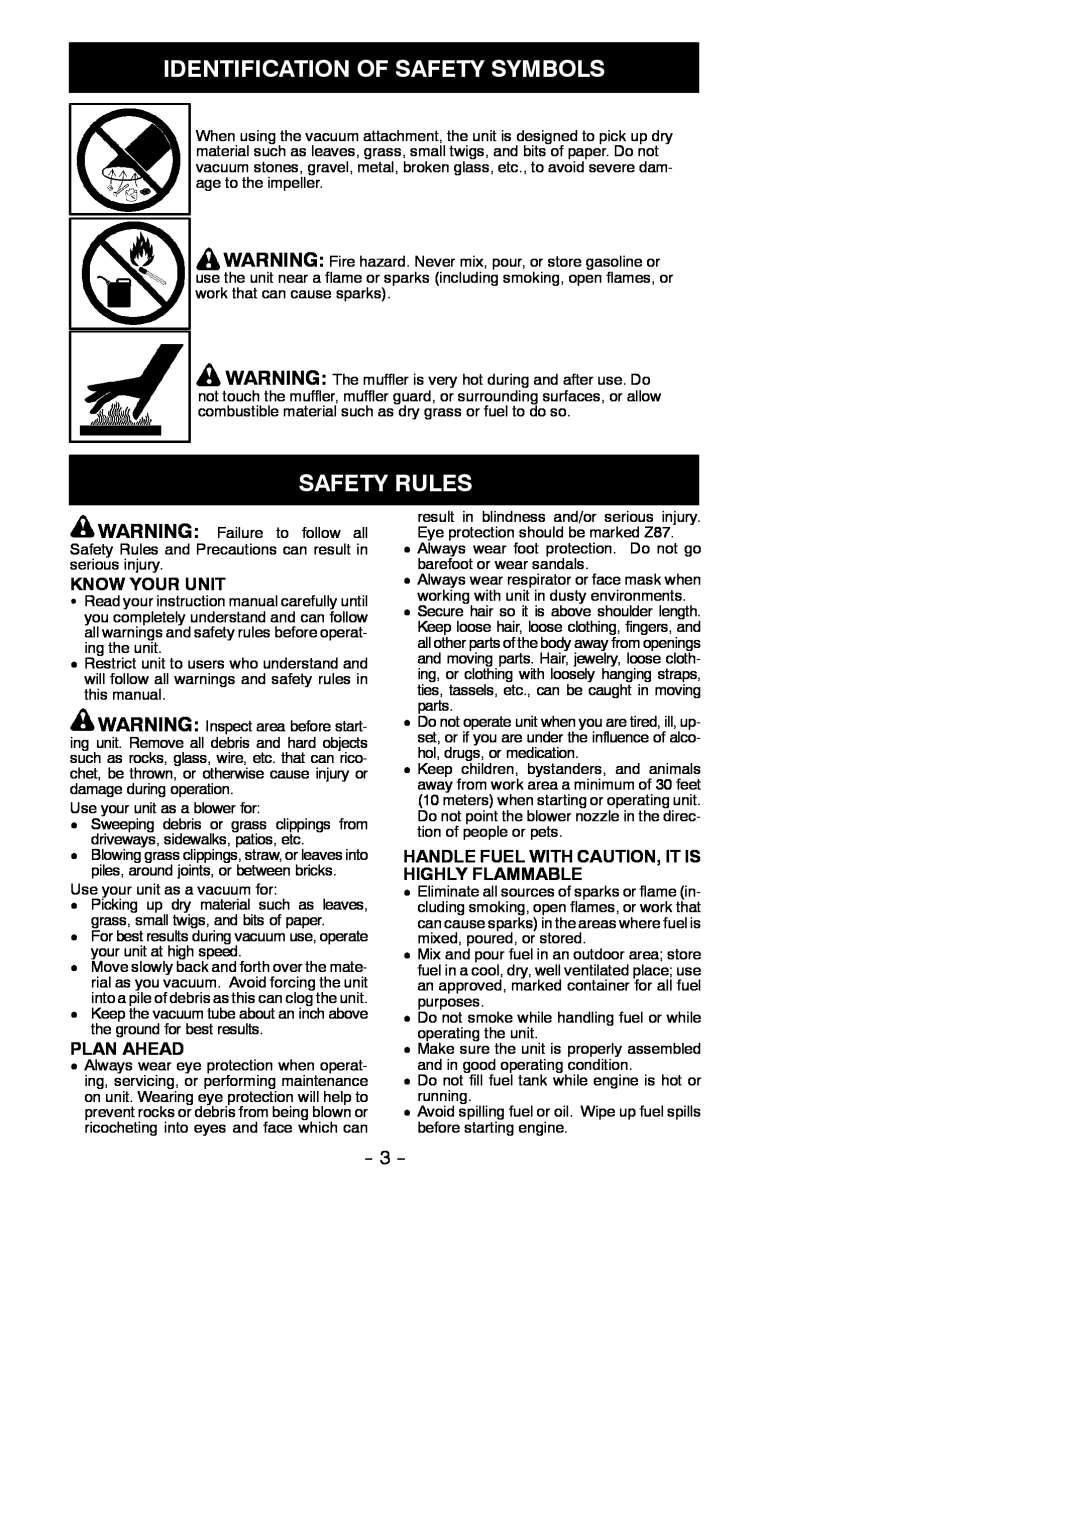 Poulan 115350727, 952711904 instruction manual Safety Rules, Identification Of Safety Symbols, Know Your Unit, Plan Ahead 